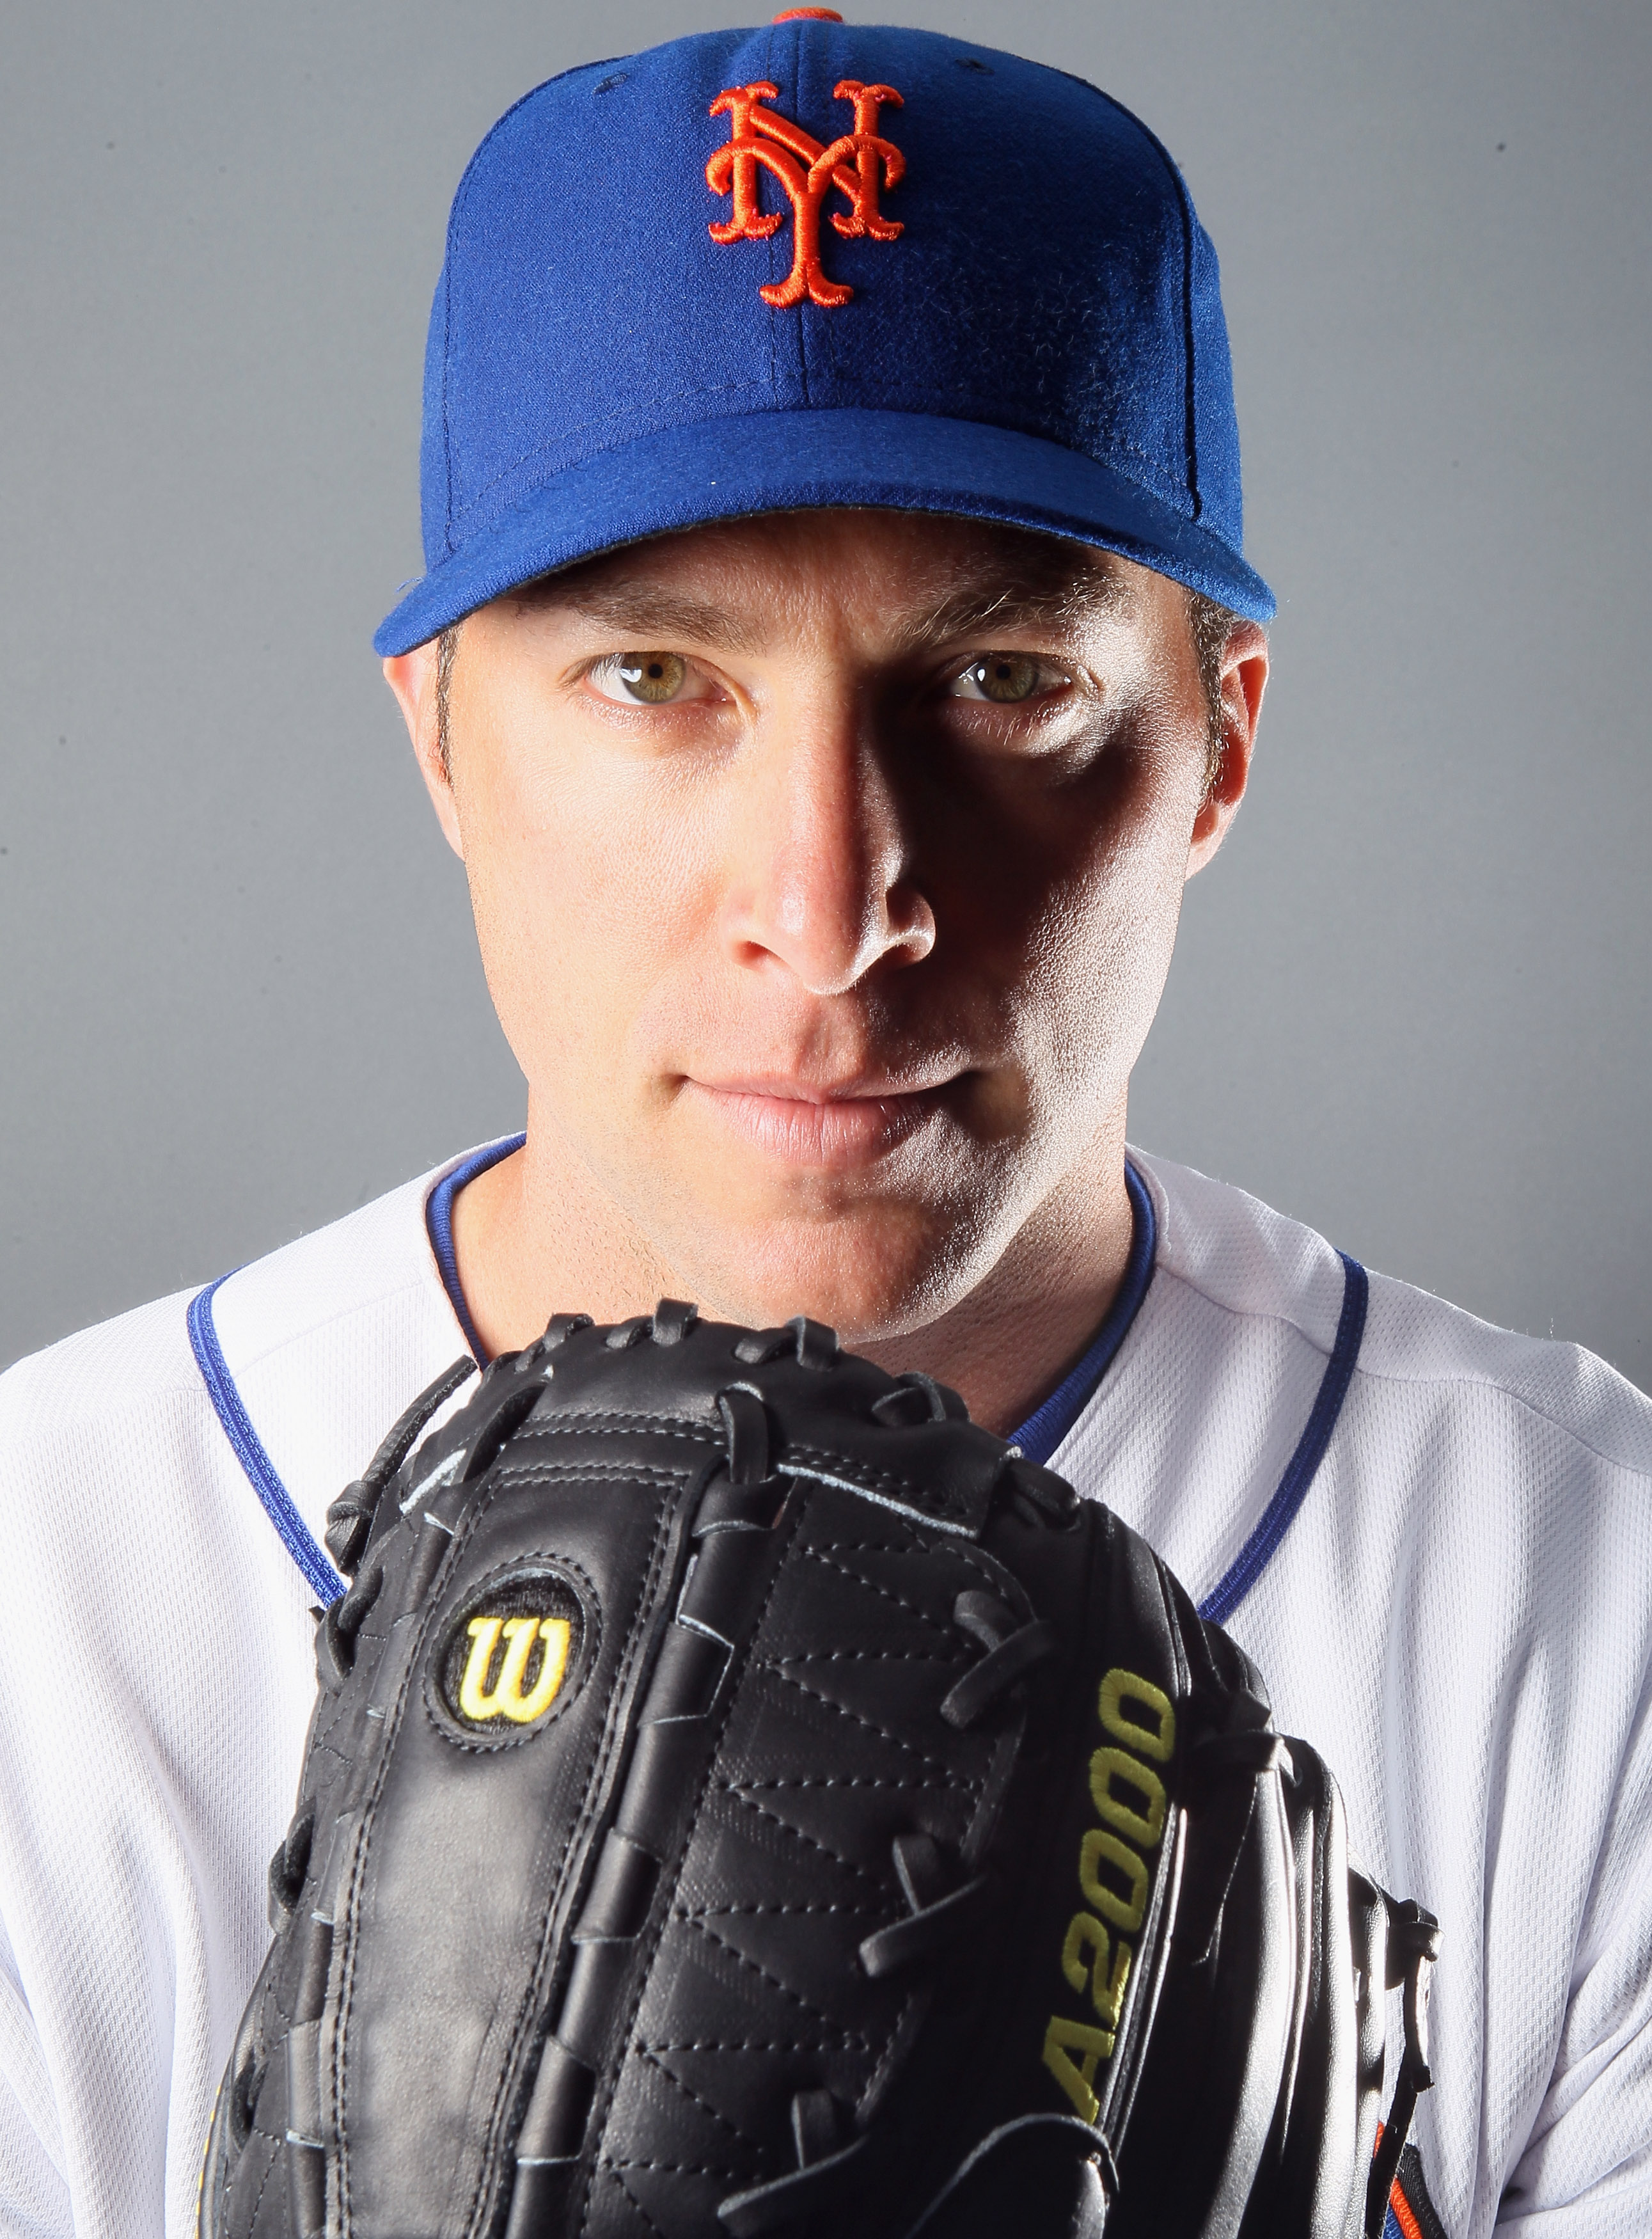 PORT ST. LUCIE, FL - FEBRUARY 24:  RY 24:  Chris Capuano #38 of the New York Mets poses for a portrait during the New York Mets Photo Day on February 24, 2011 at Digital Domain Park in Port St. Lucie, Florida.  (Photo by Elsa/Getty Images)